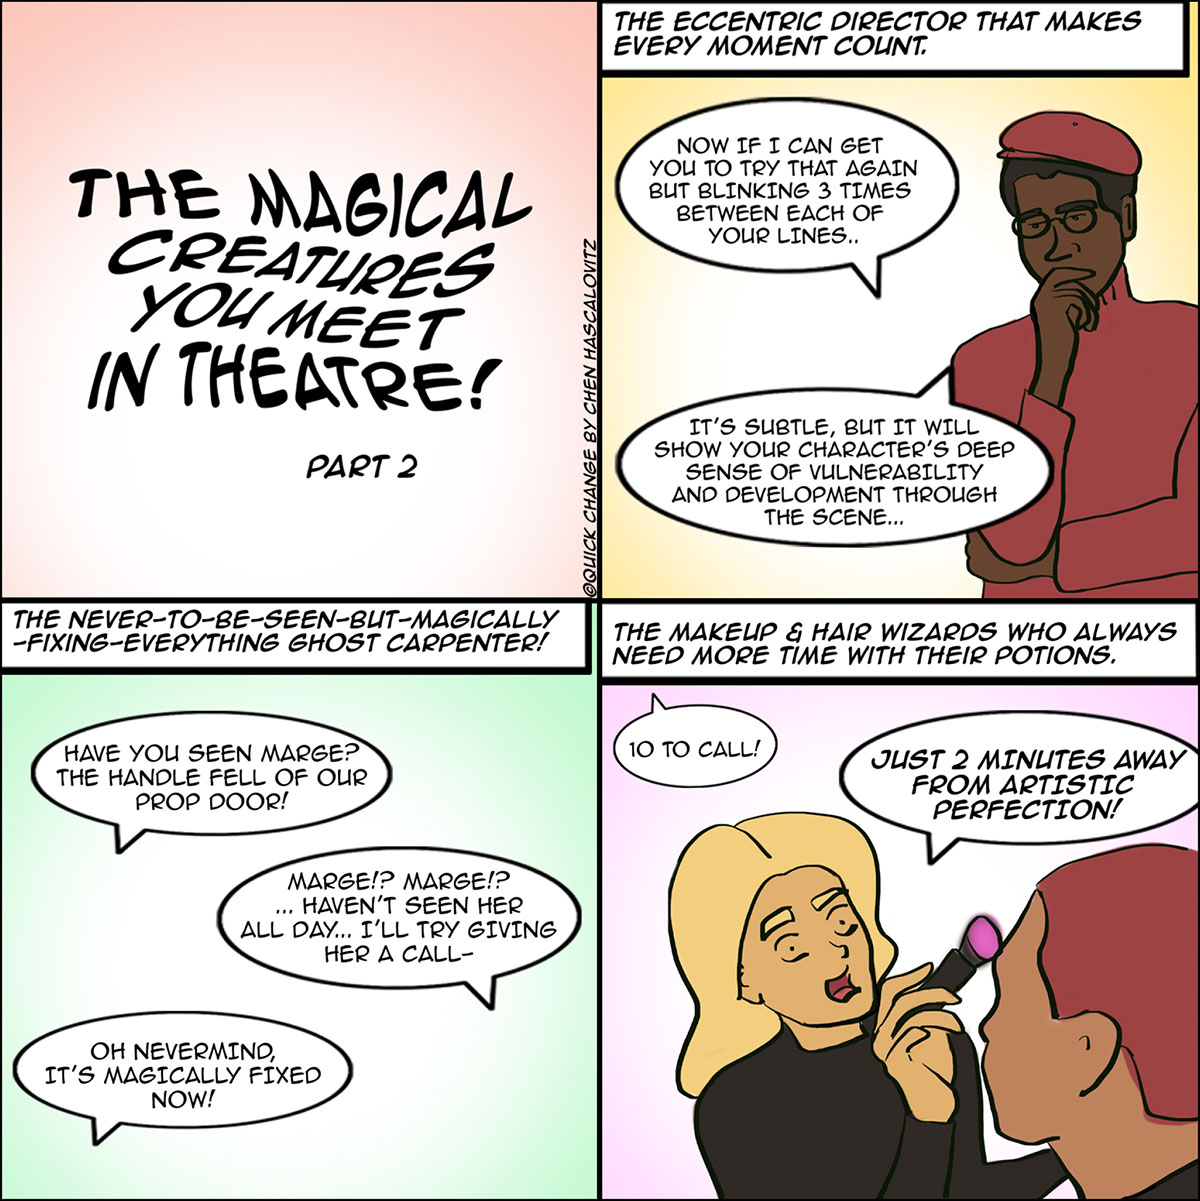 Four panel comic illustrating the magical creatures you meet in the theatre part 2.